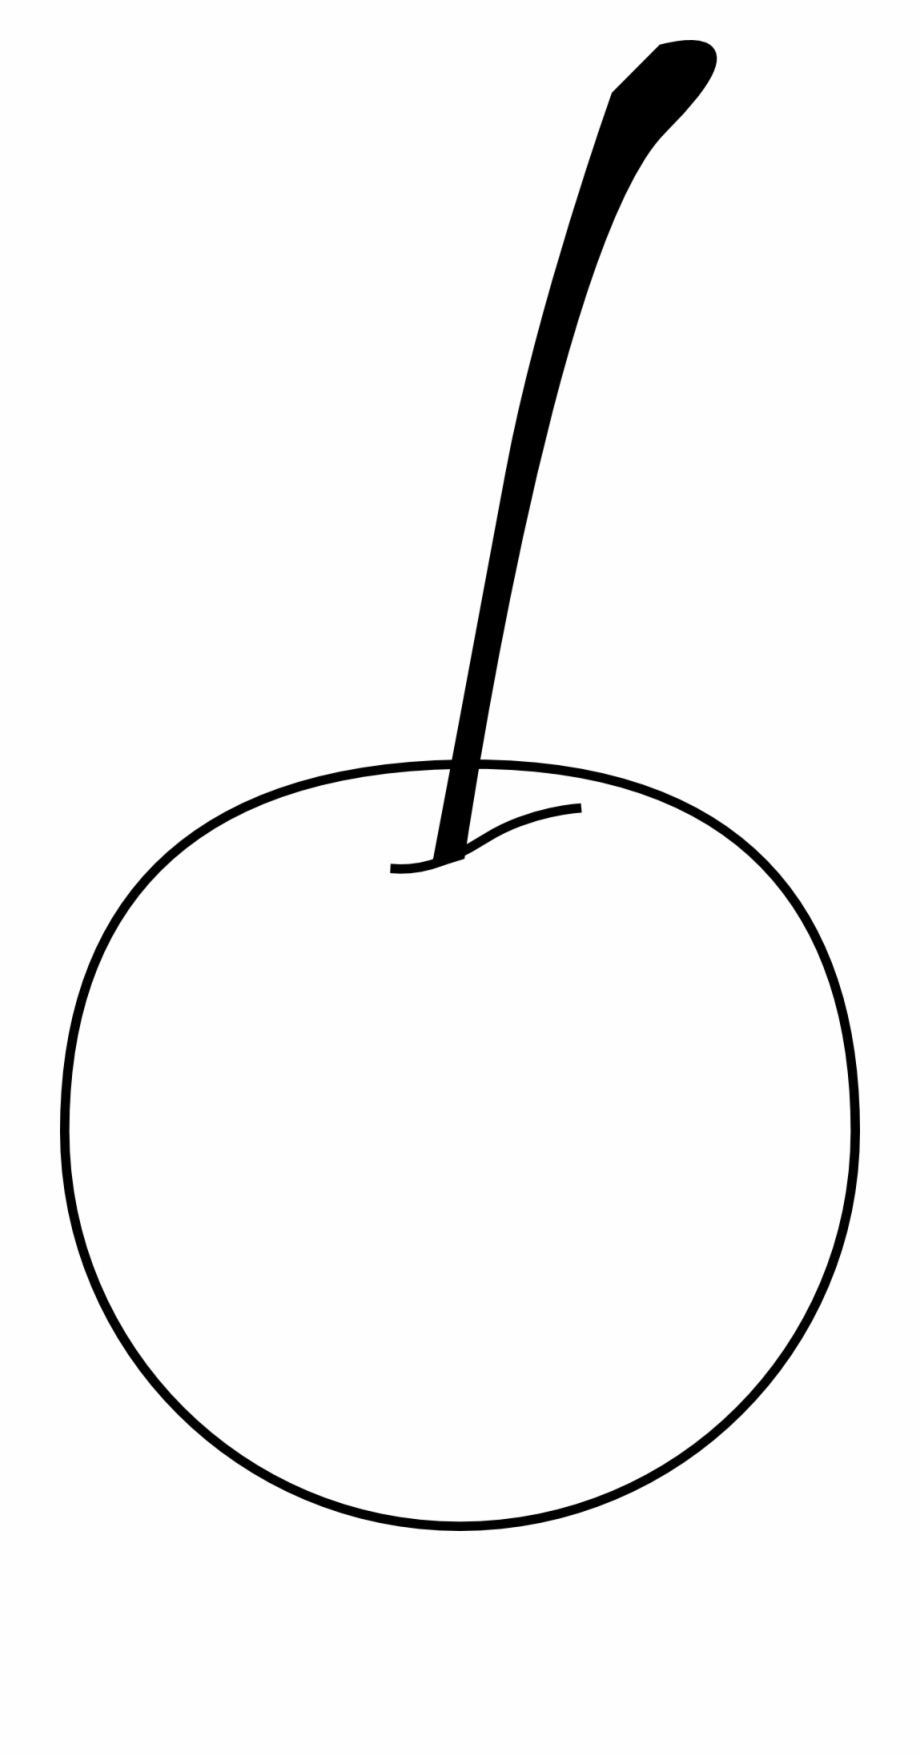 Clip Arts Related To : Cherry Black White Line Art 999Px Apple. view all .....